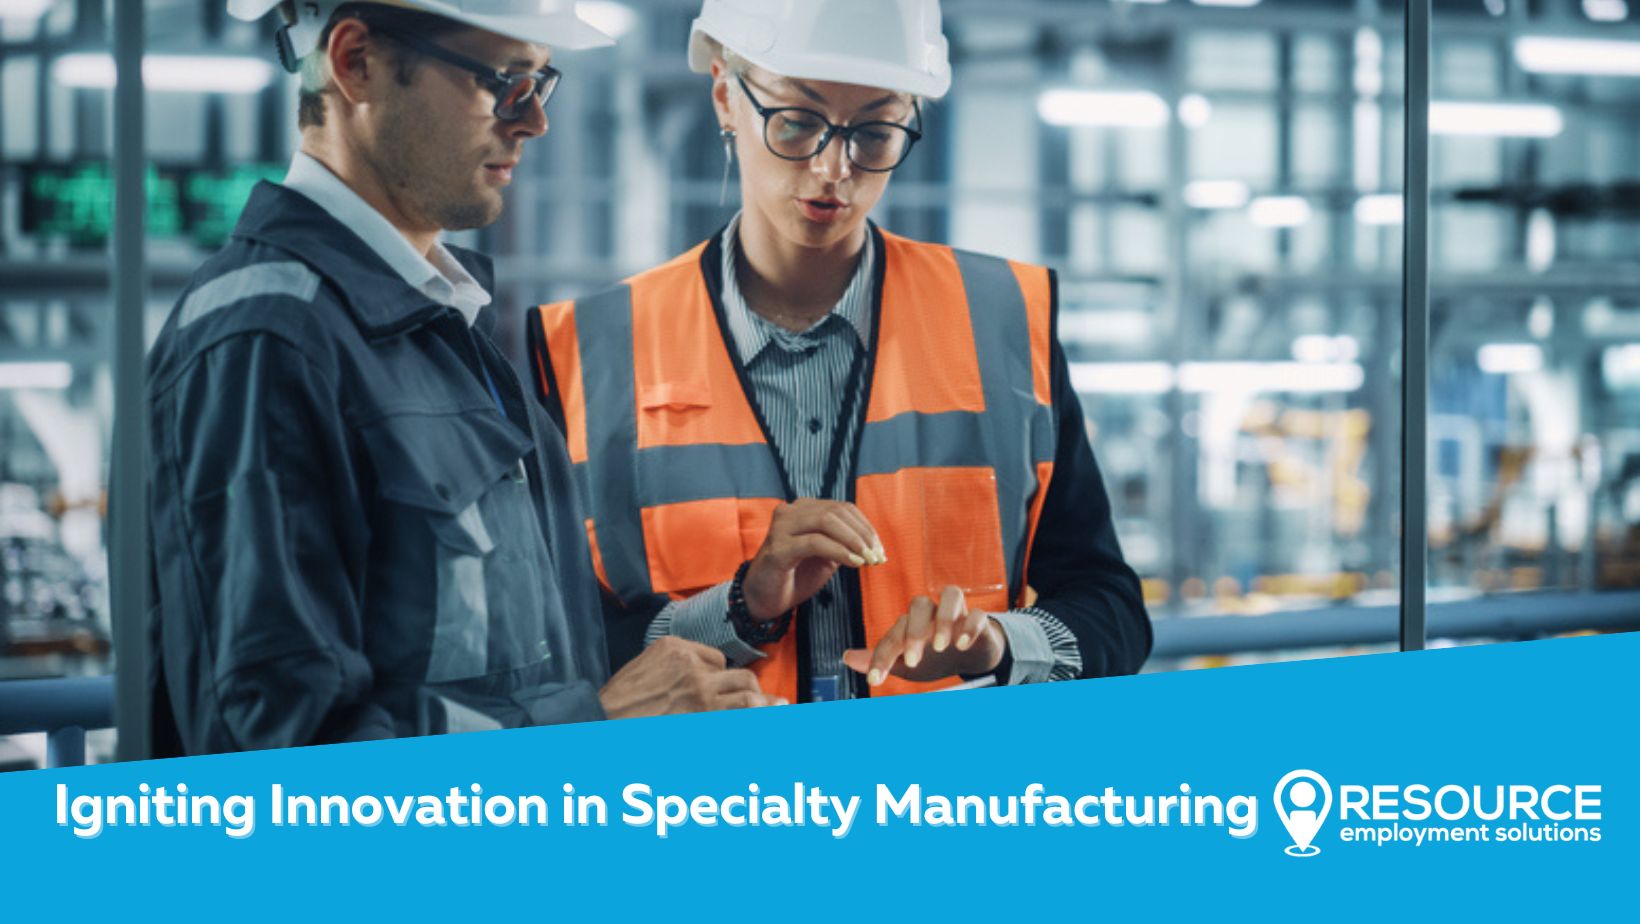  Igniting Innovation in Specialty Manufacturing: Resource Employment Solutions at the Forefront